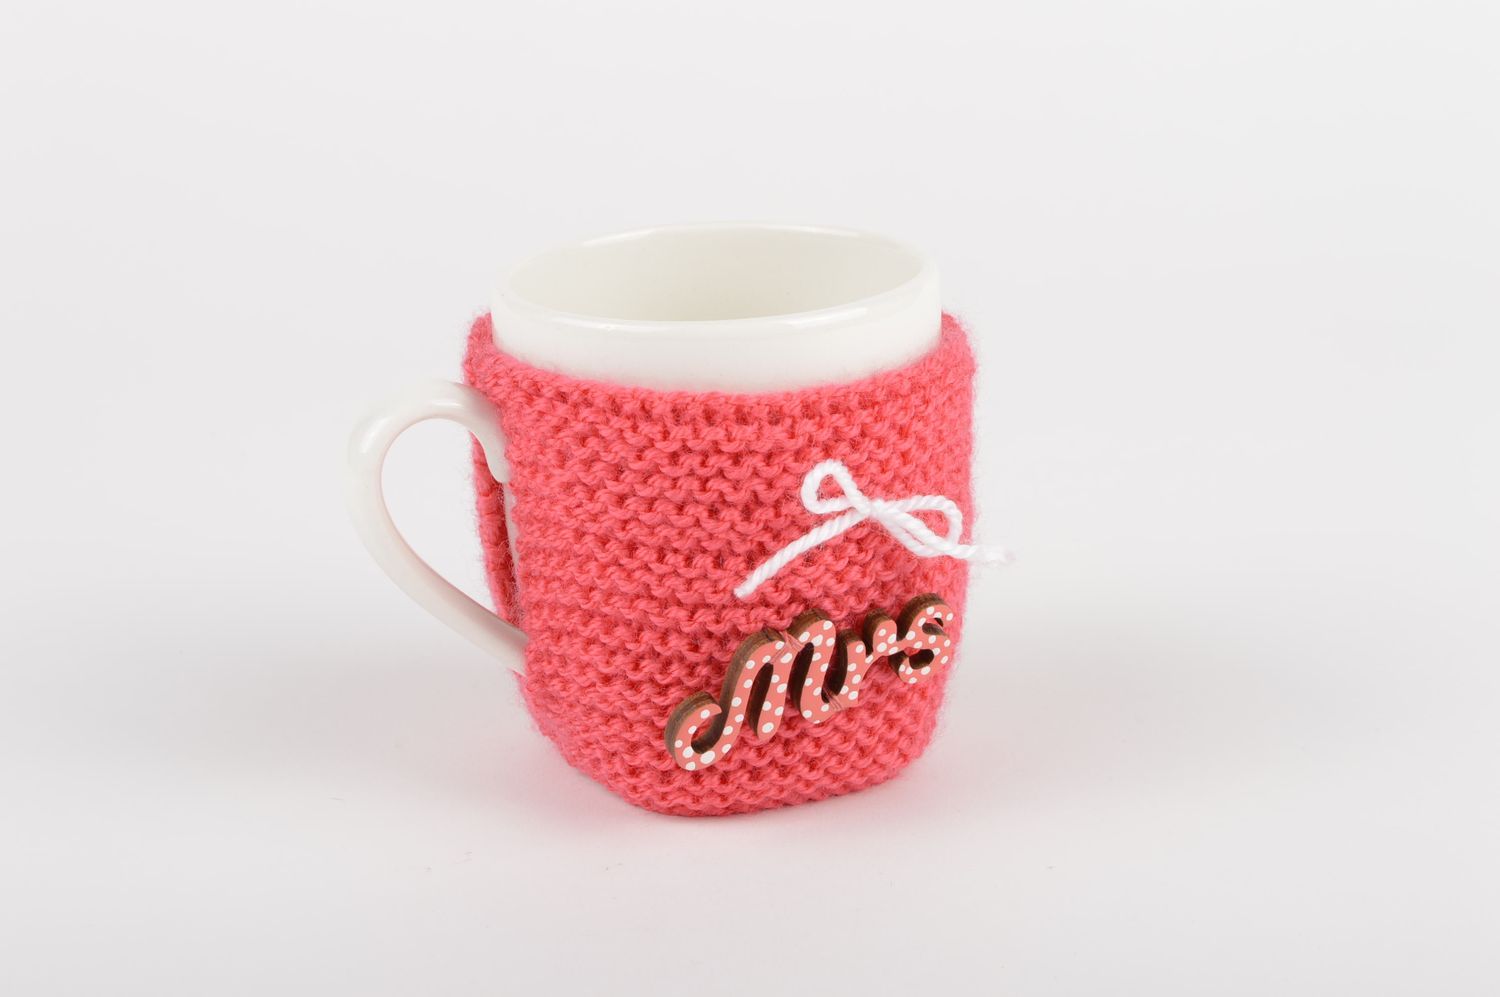 White porcelain 7 oz teacup with handle and knitted pink warmer cover with MRS pattern photo 2